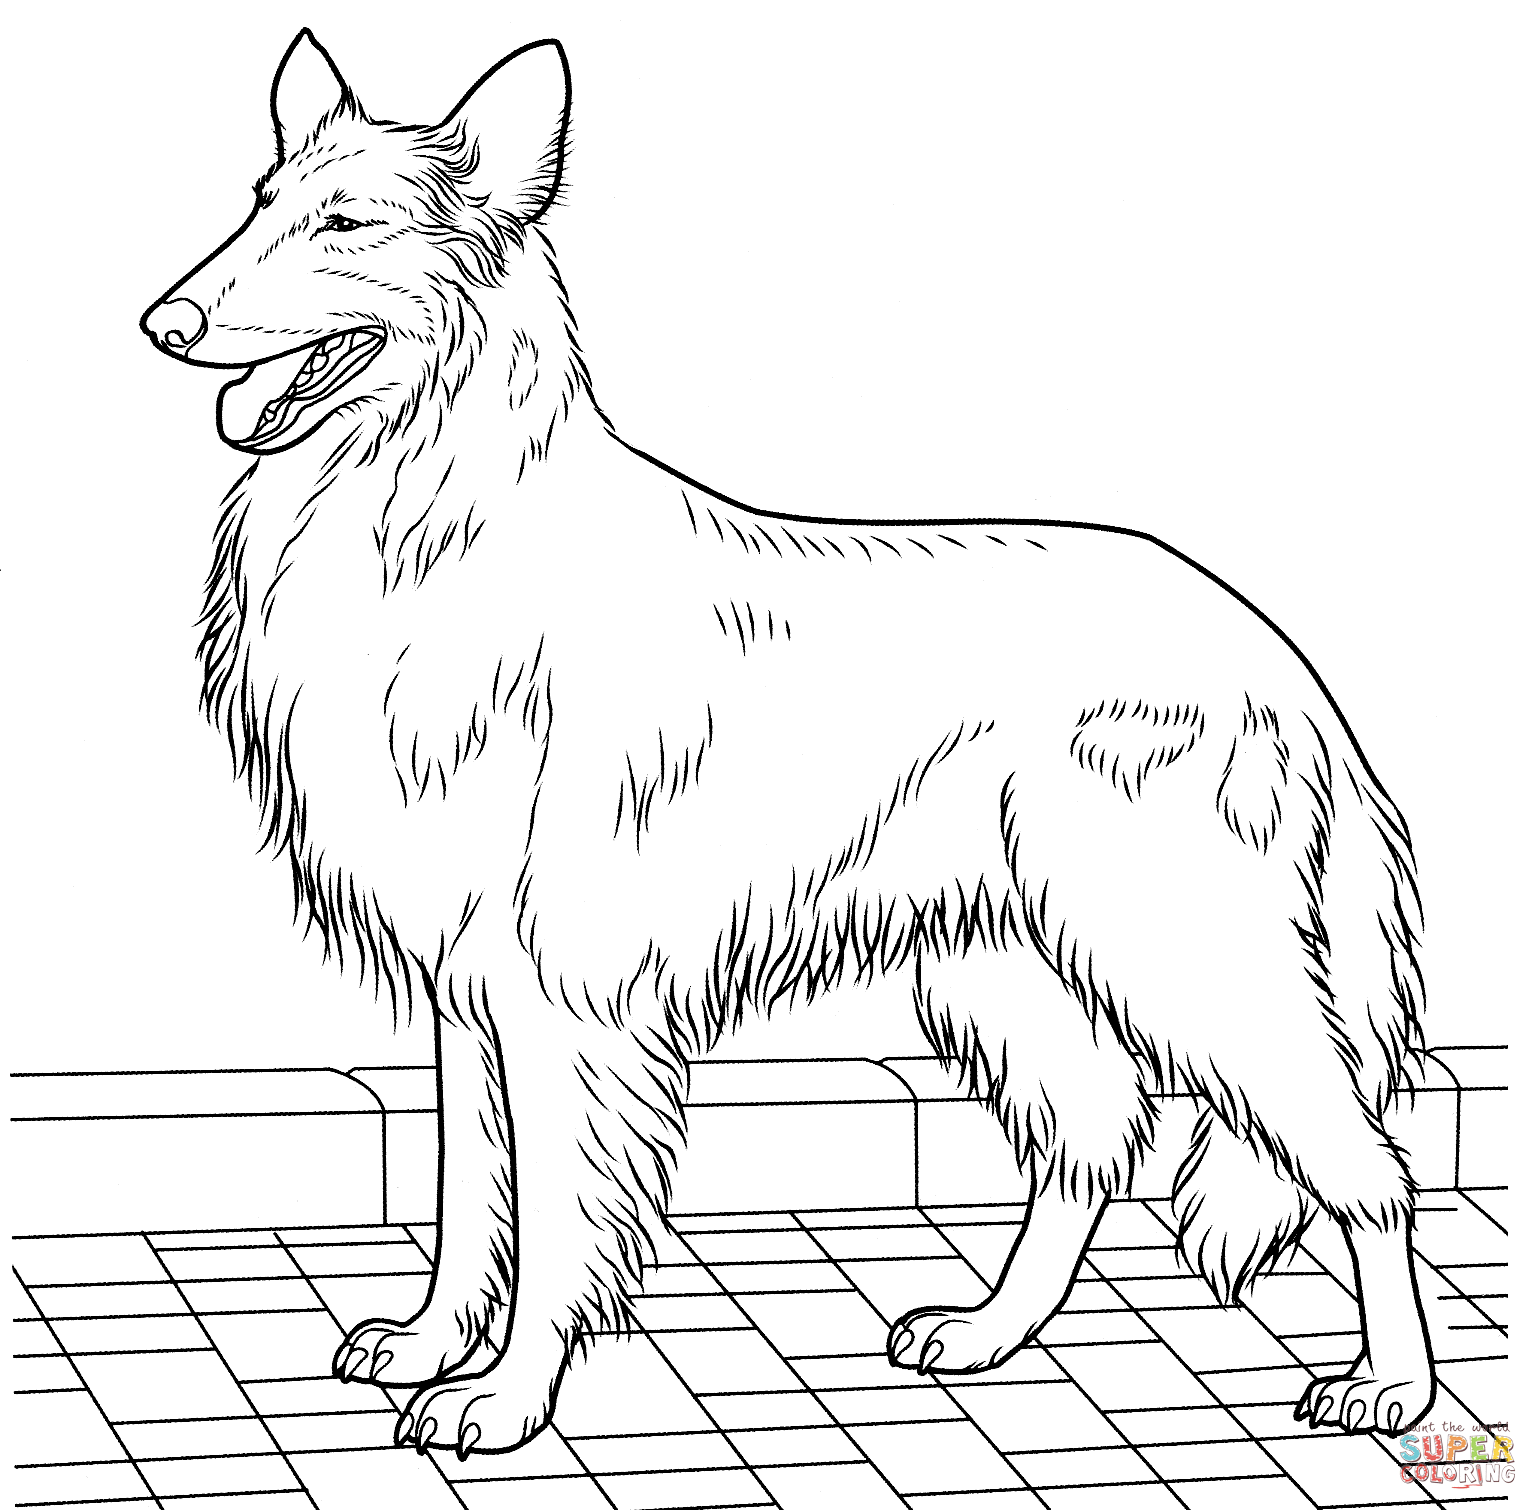 Collie coloring #11, Download drawings